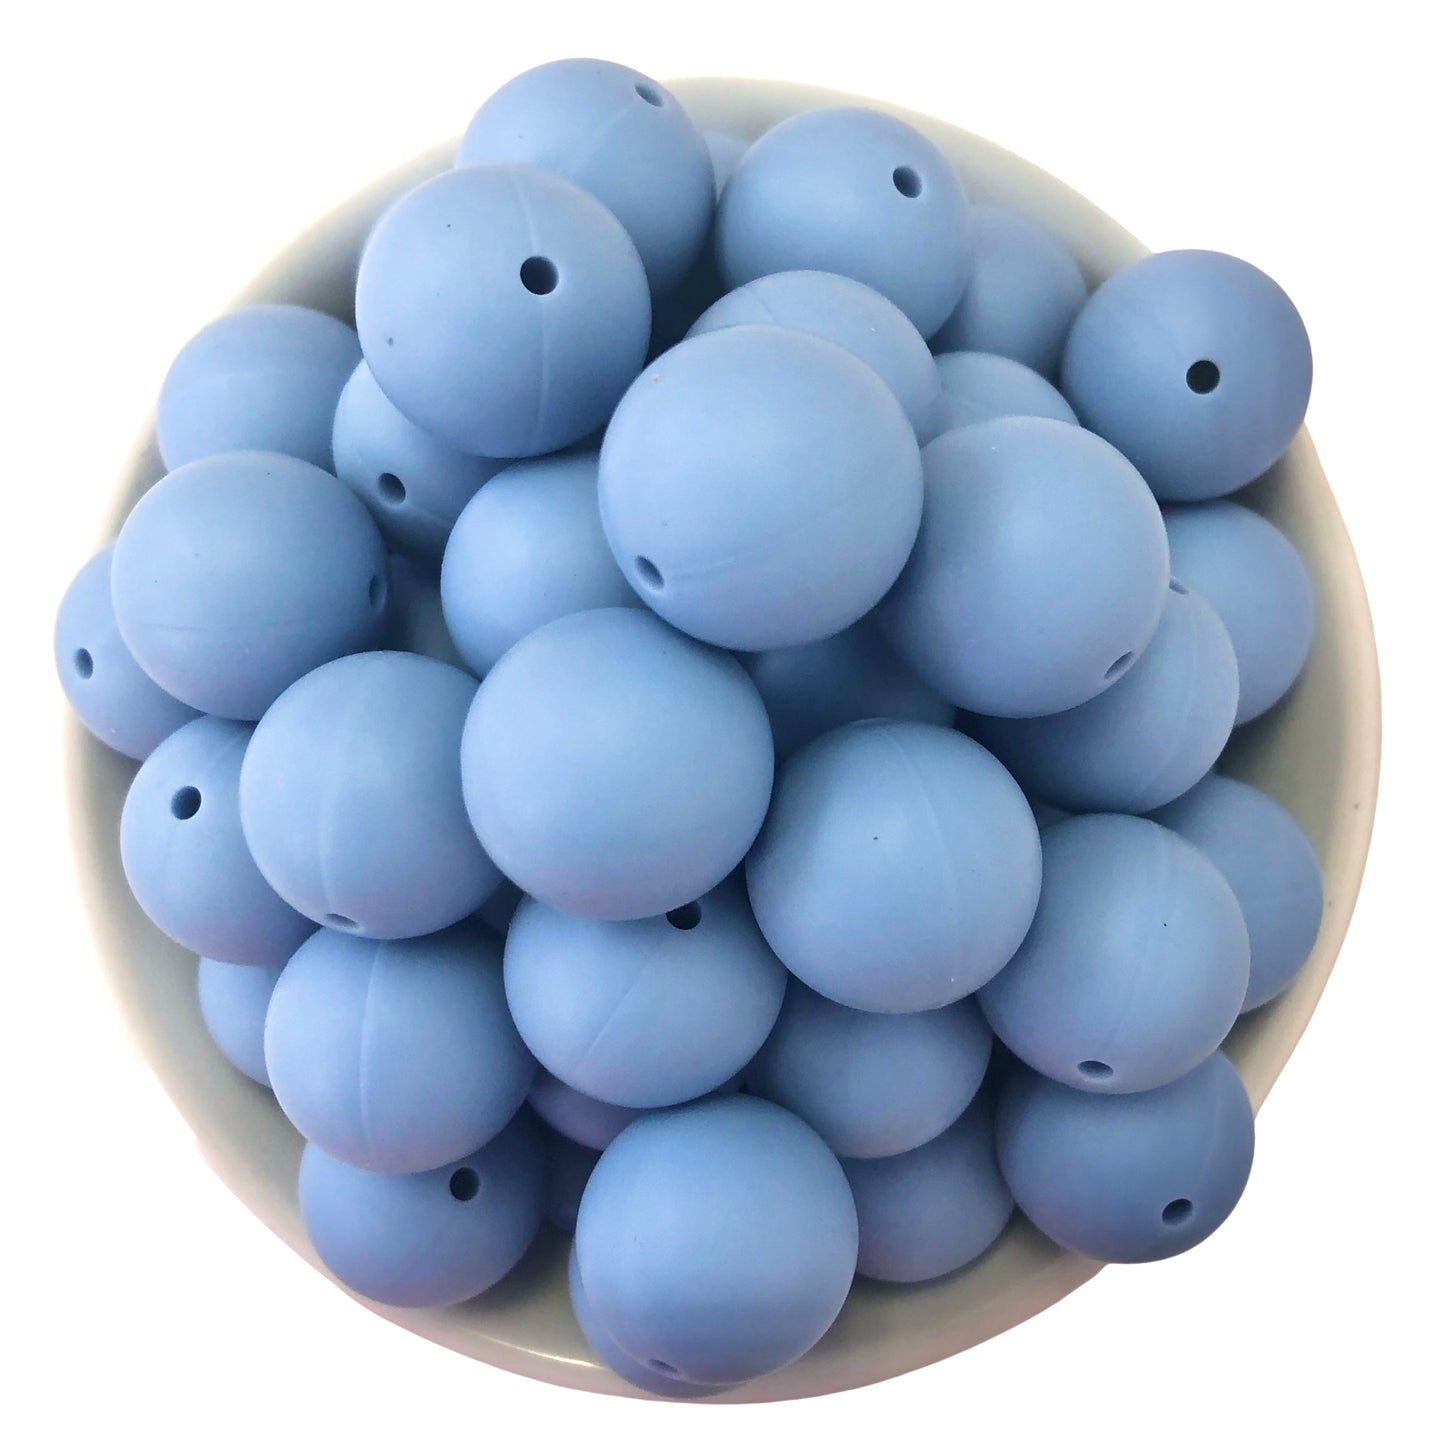 Cloudy Sky 19mm Silicone Beads - 5 pk.